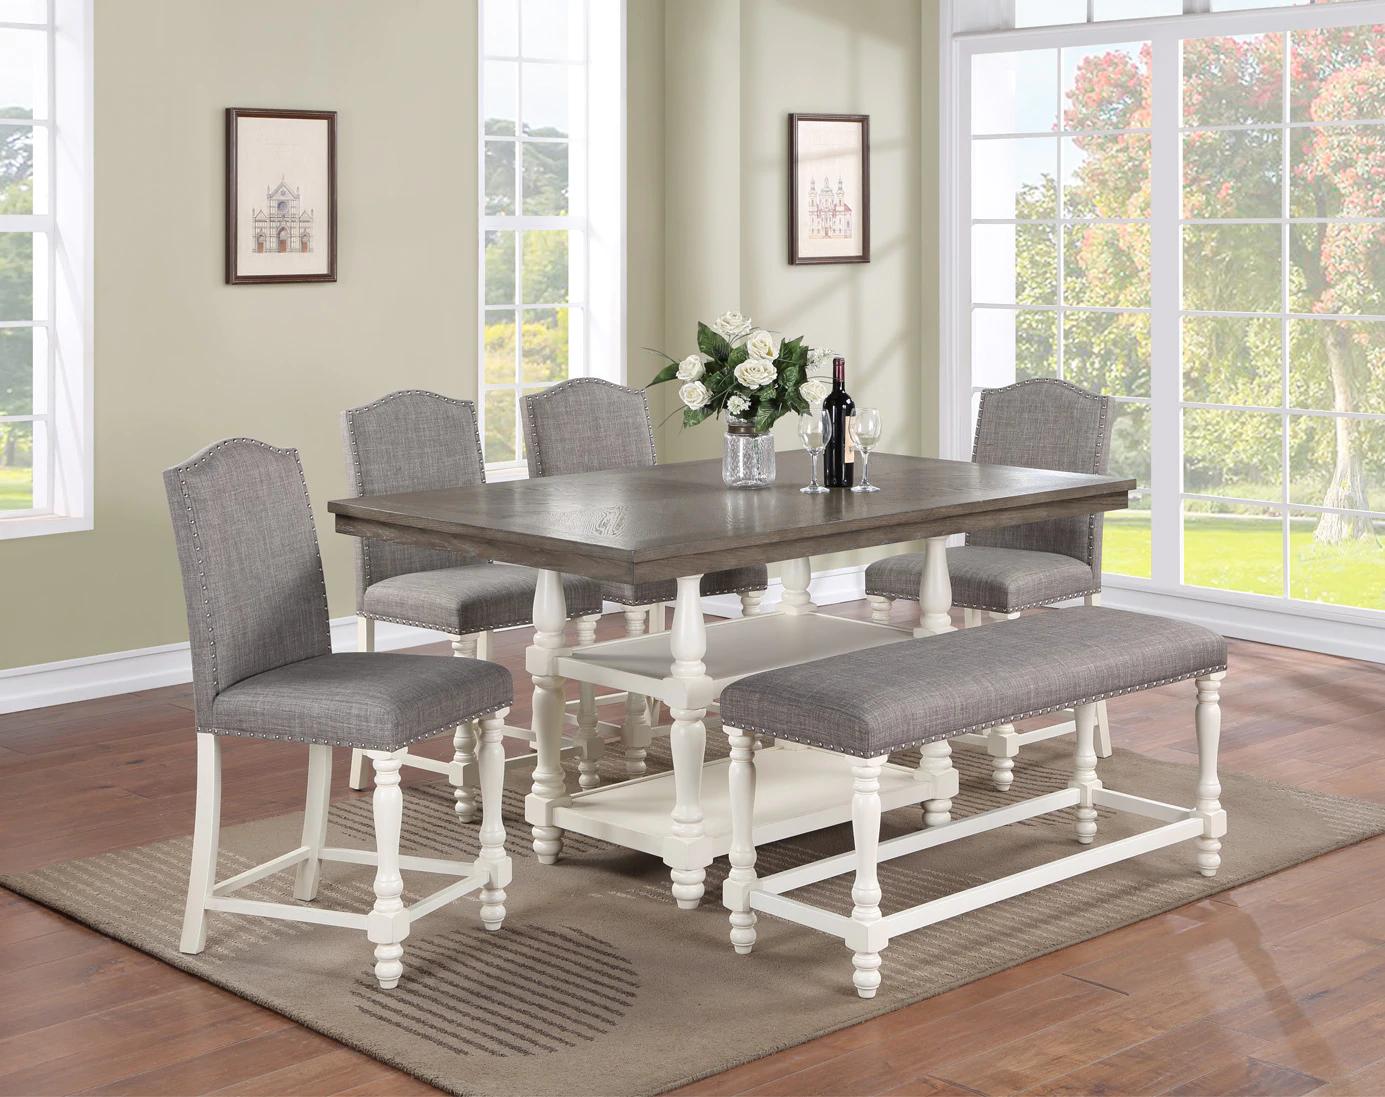 Traditional, Farmhouse Counter Height Set Langley 2766CG-T-4266-6pcs in White and Gray Linen